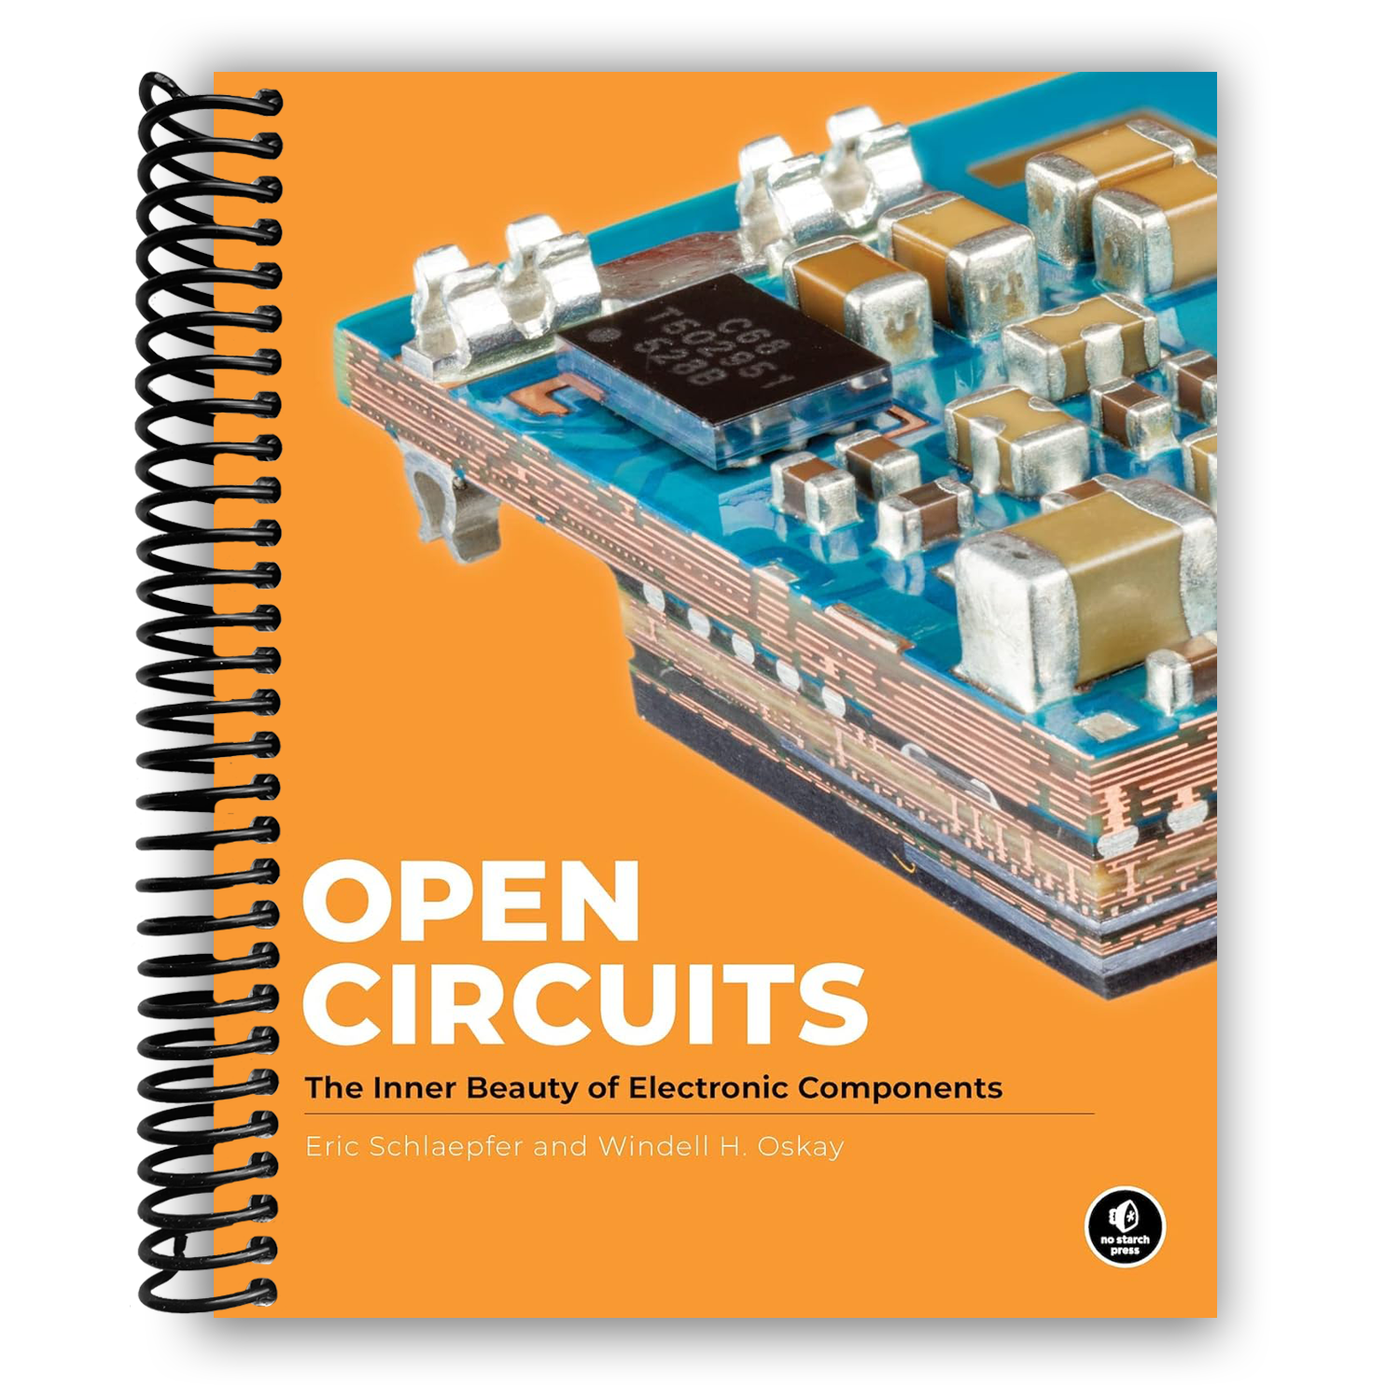 Open Circuits: The Inner Beauty of Electronic Components (Spiral Bound)